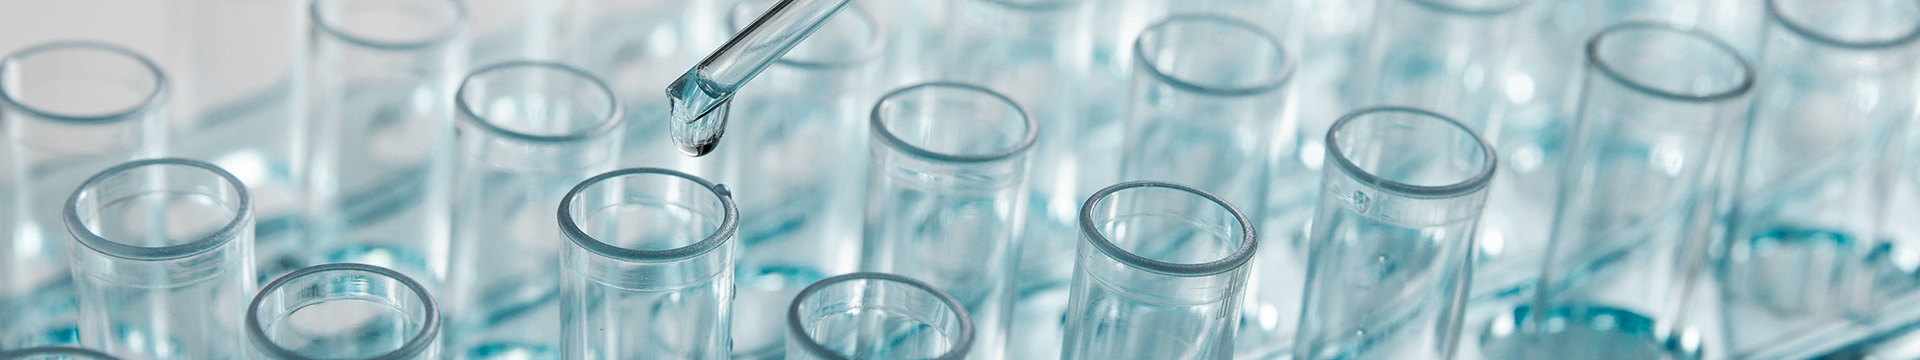 A close-up on empty glass vials